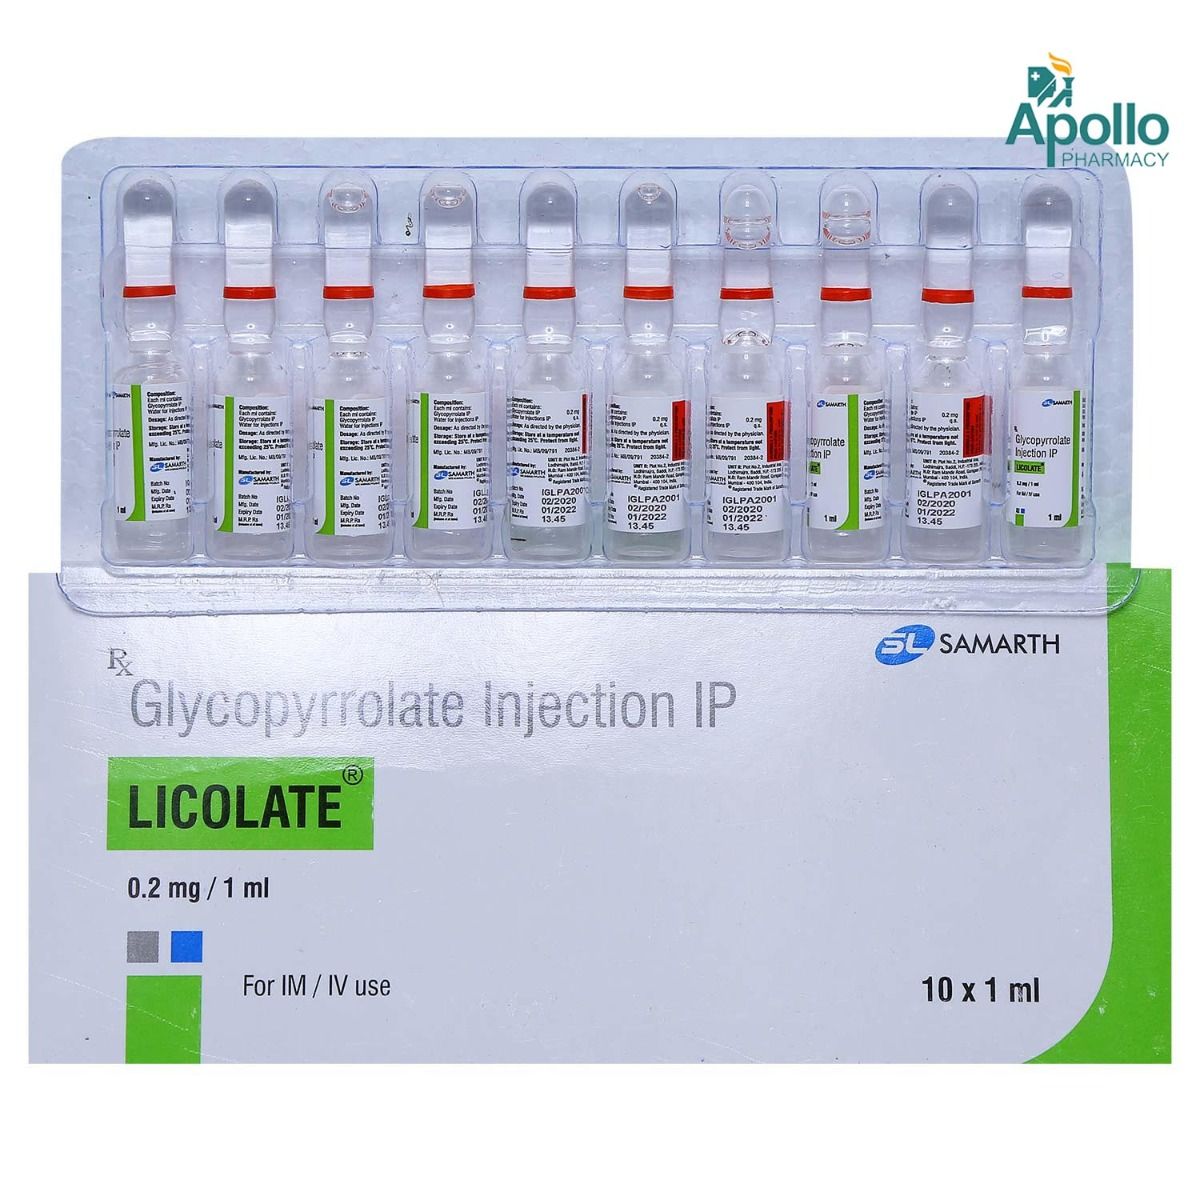 LICOLATE INJECTION 1ML, Pack of 1 Injection